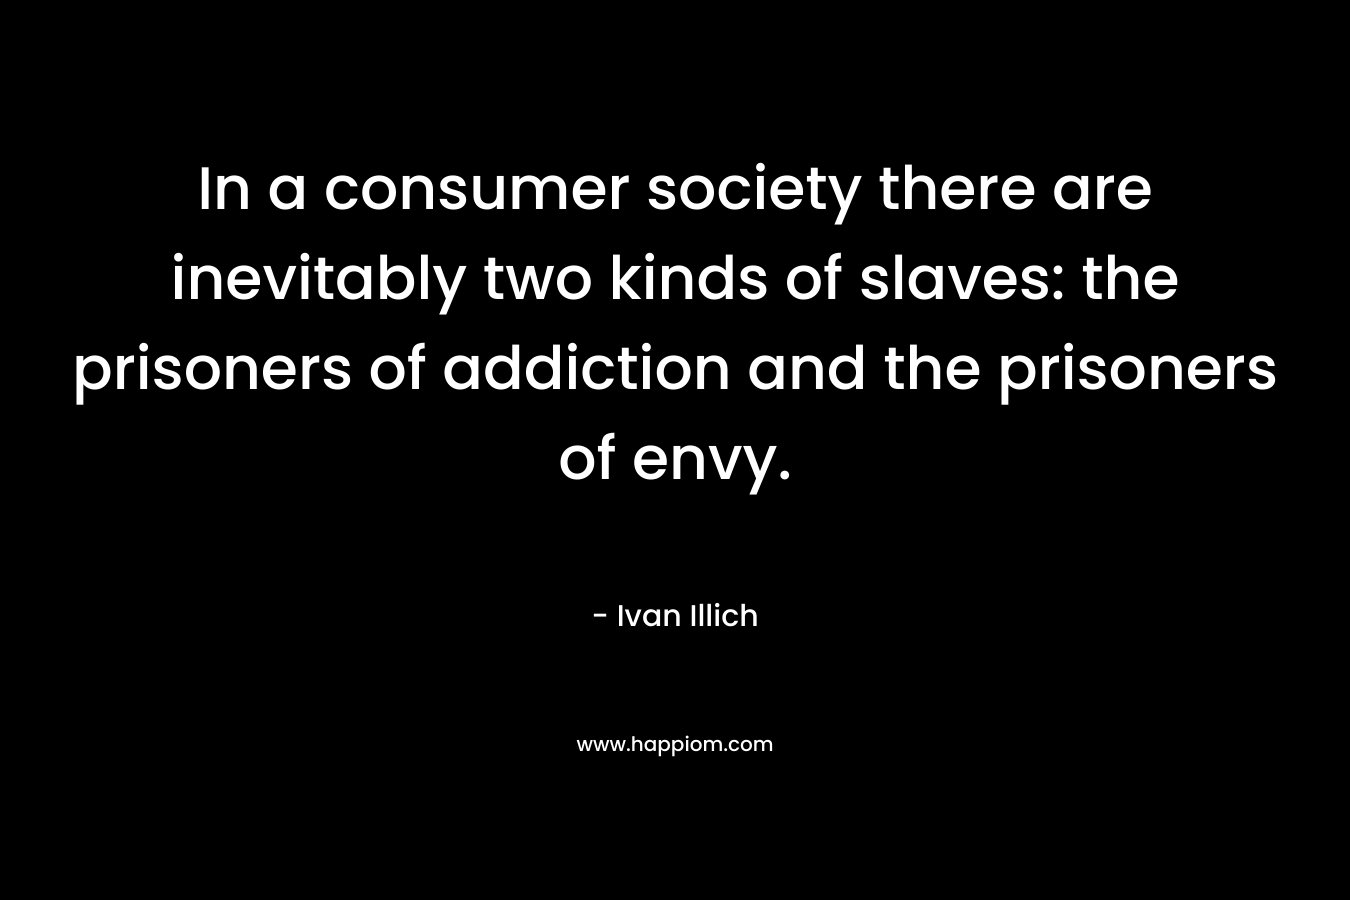 In a consumer society there are inevitably two kinds of slaves: the prisoners of addiction and the prisoners of envy. – Ivan Illich